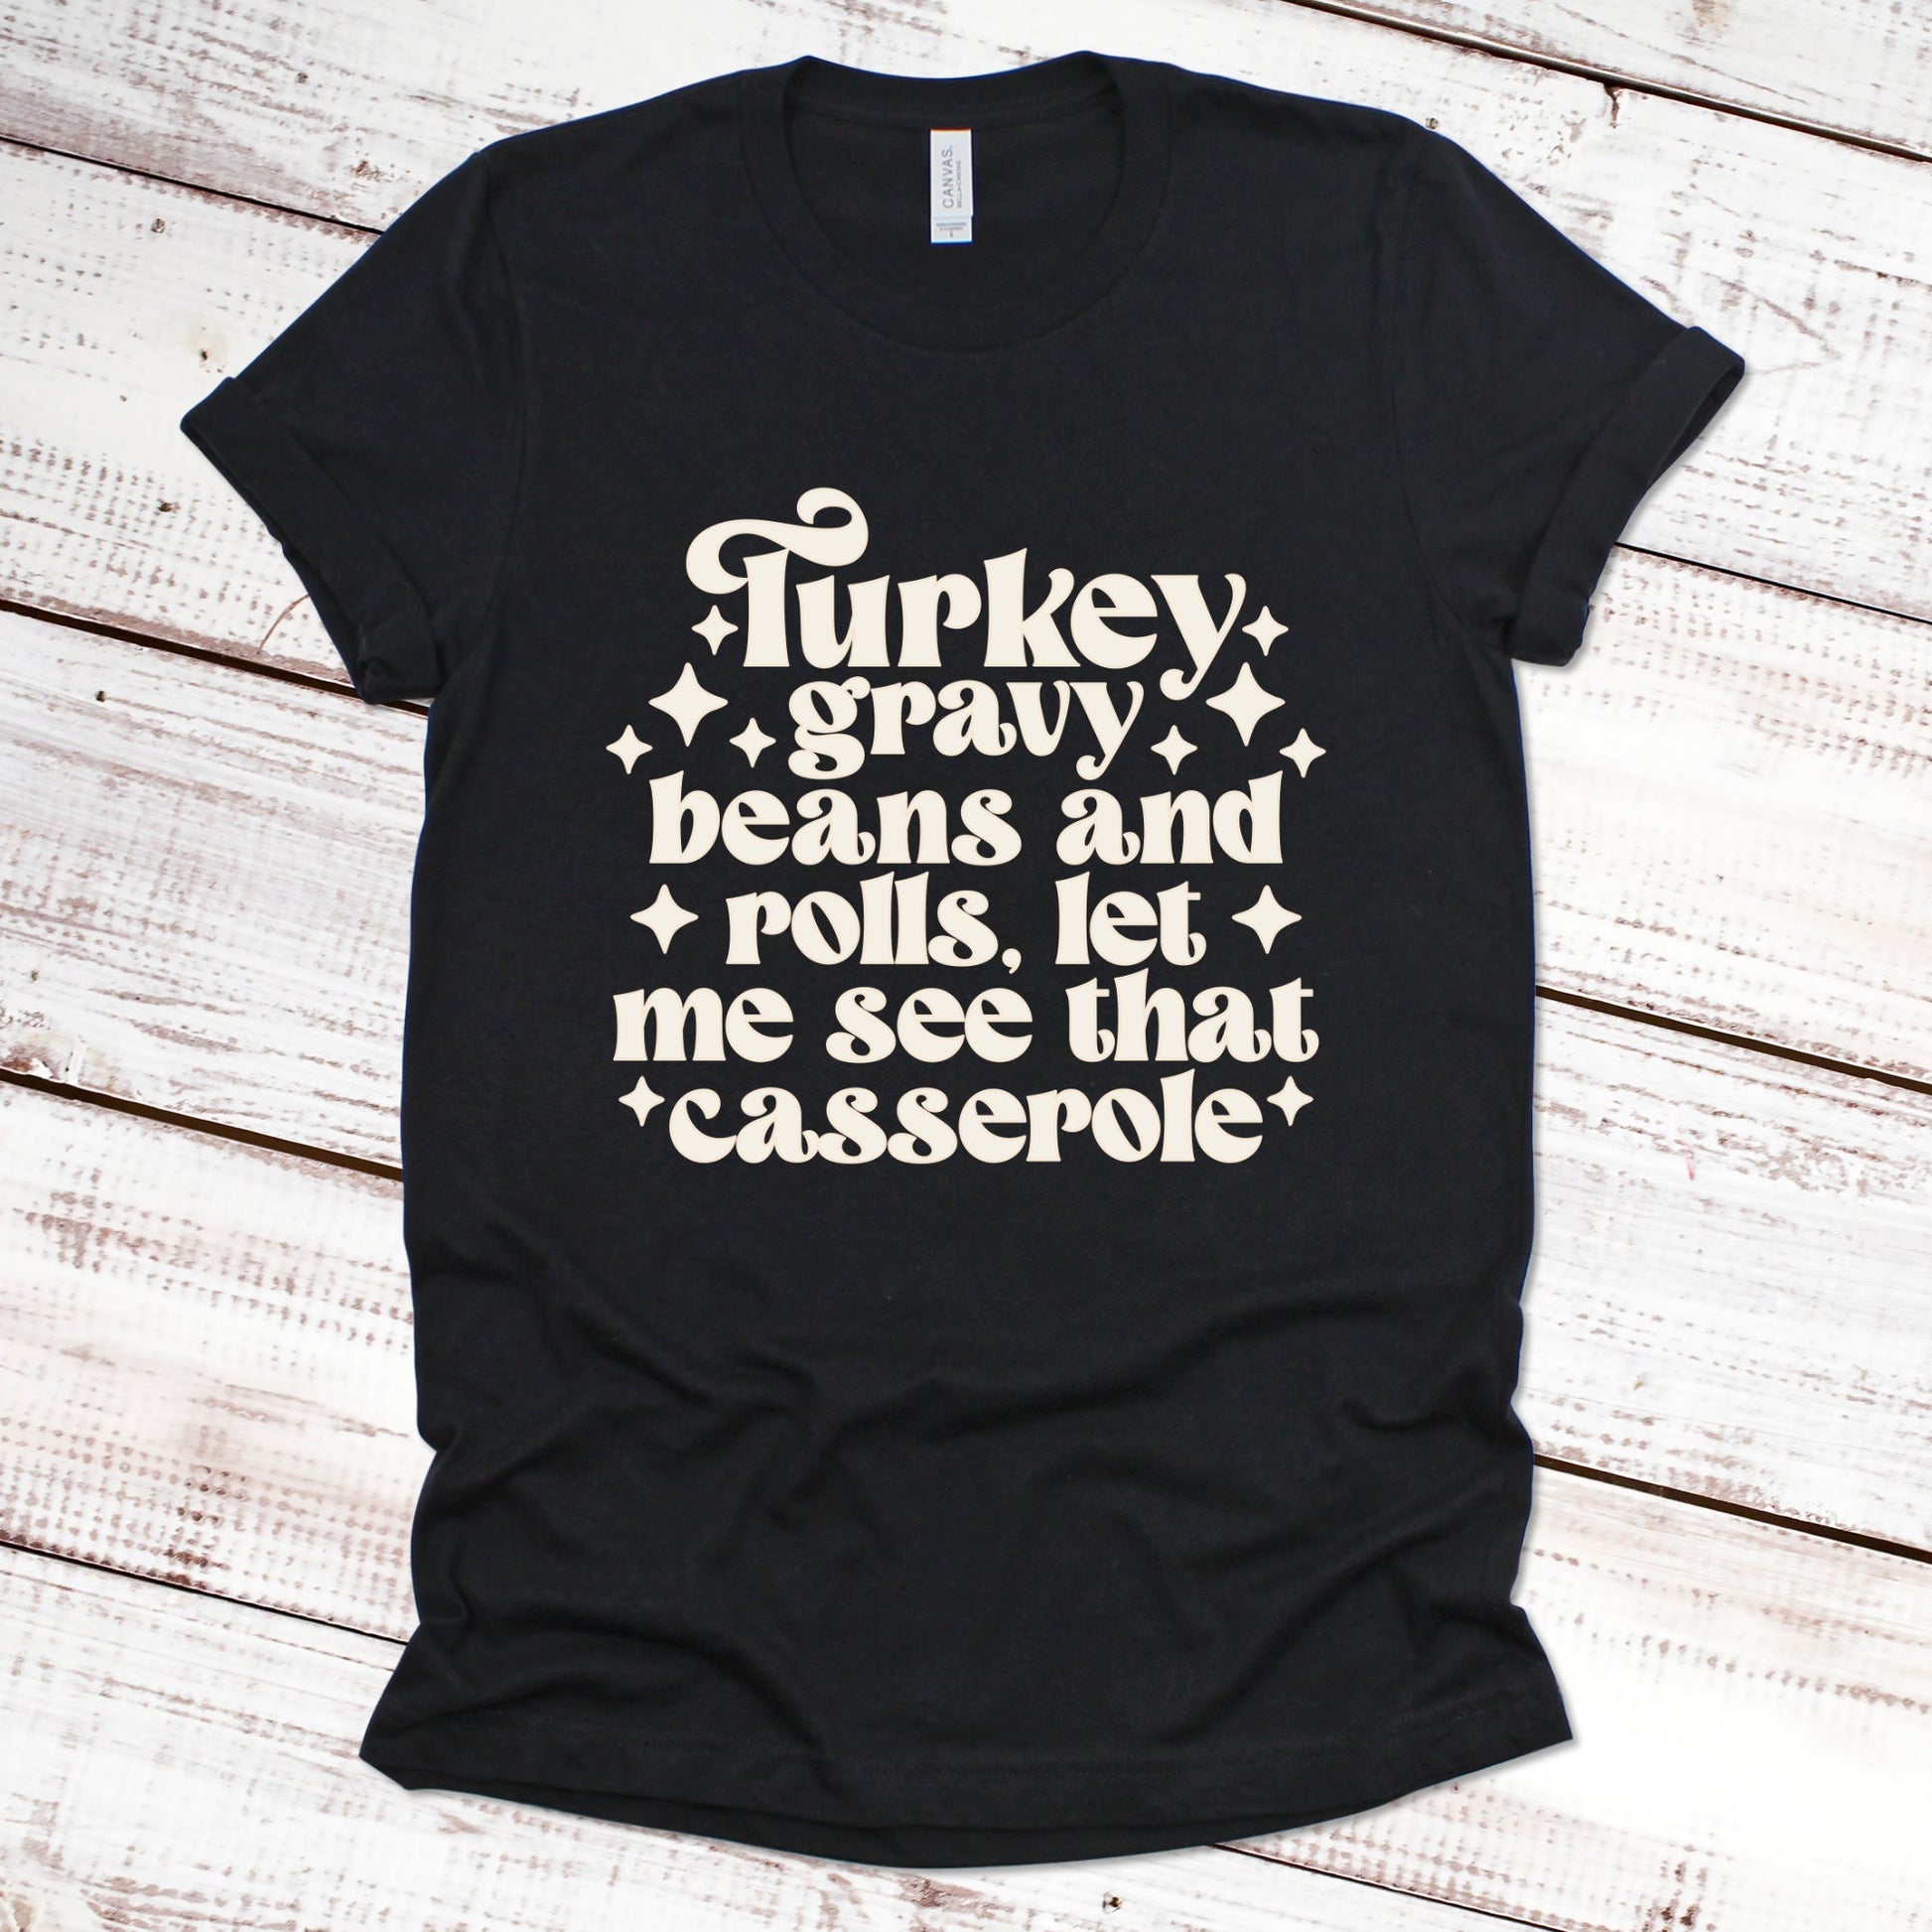 Turkey Gravy Beans and Rolls, Let Me See That Casserole Thanksgiving Shirt Great Giftables Black XS 